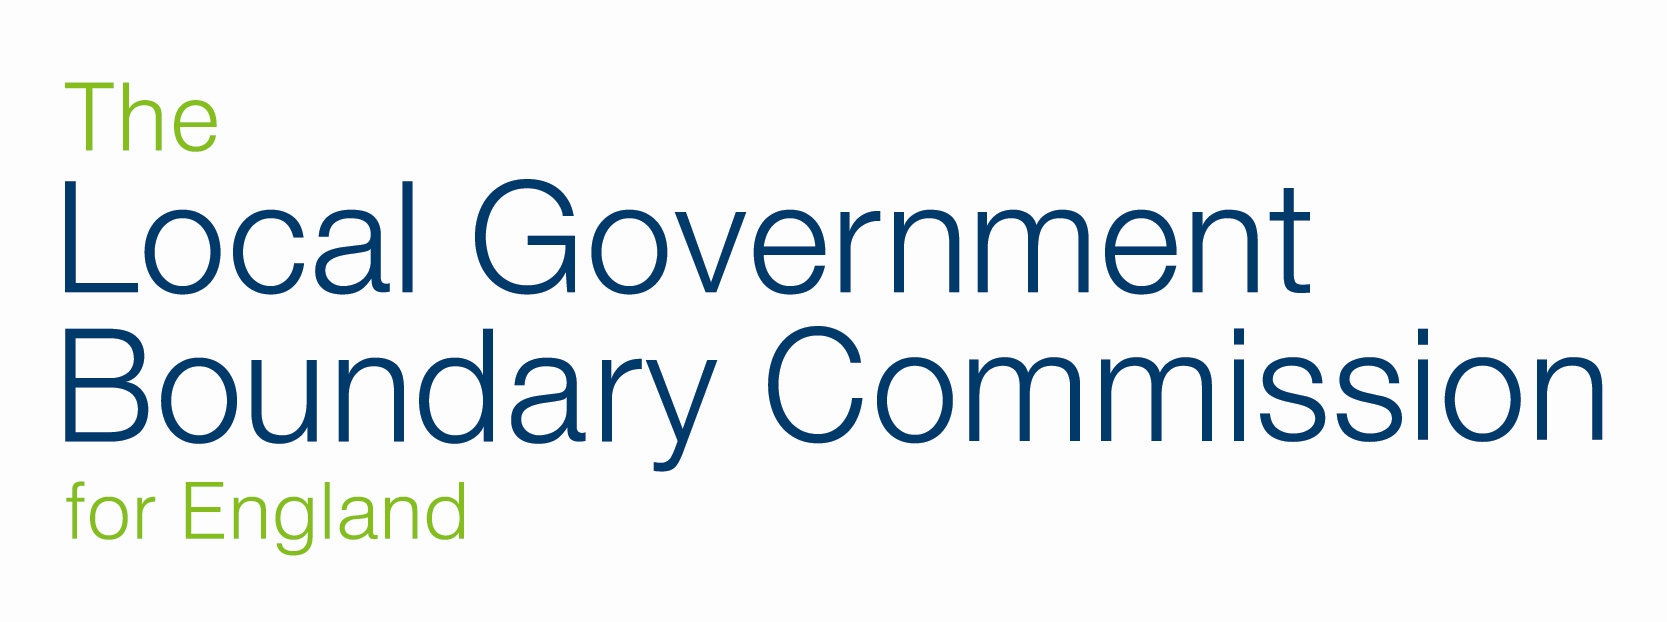  Local Government Boundary Commission logo